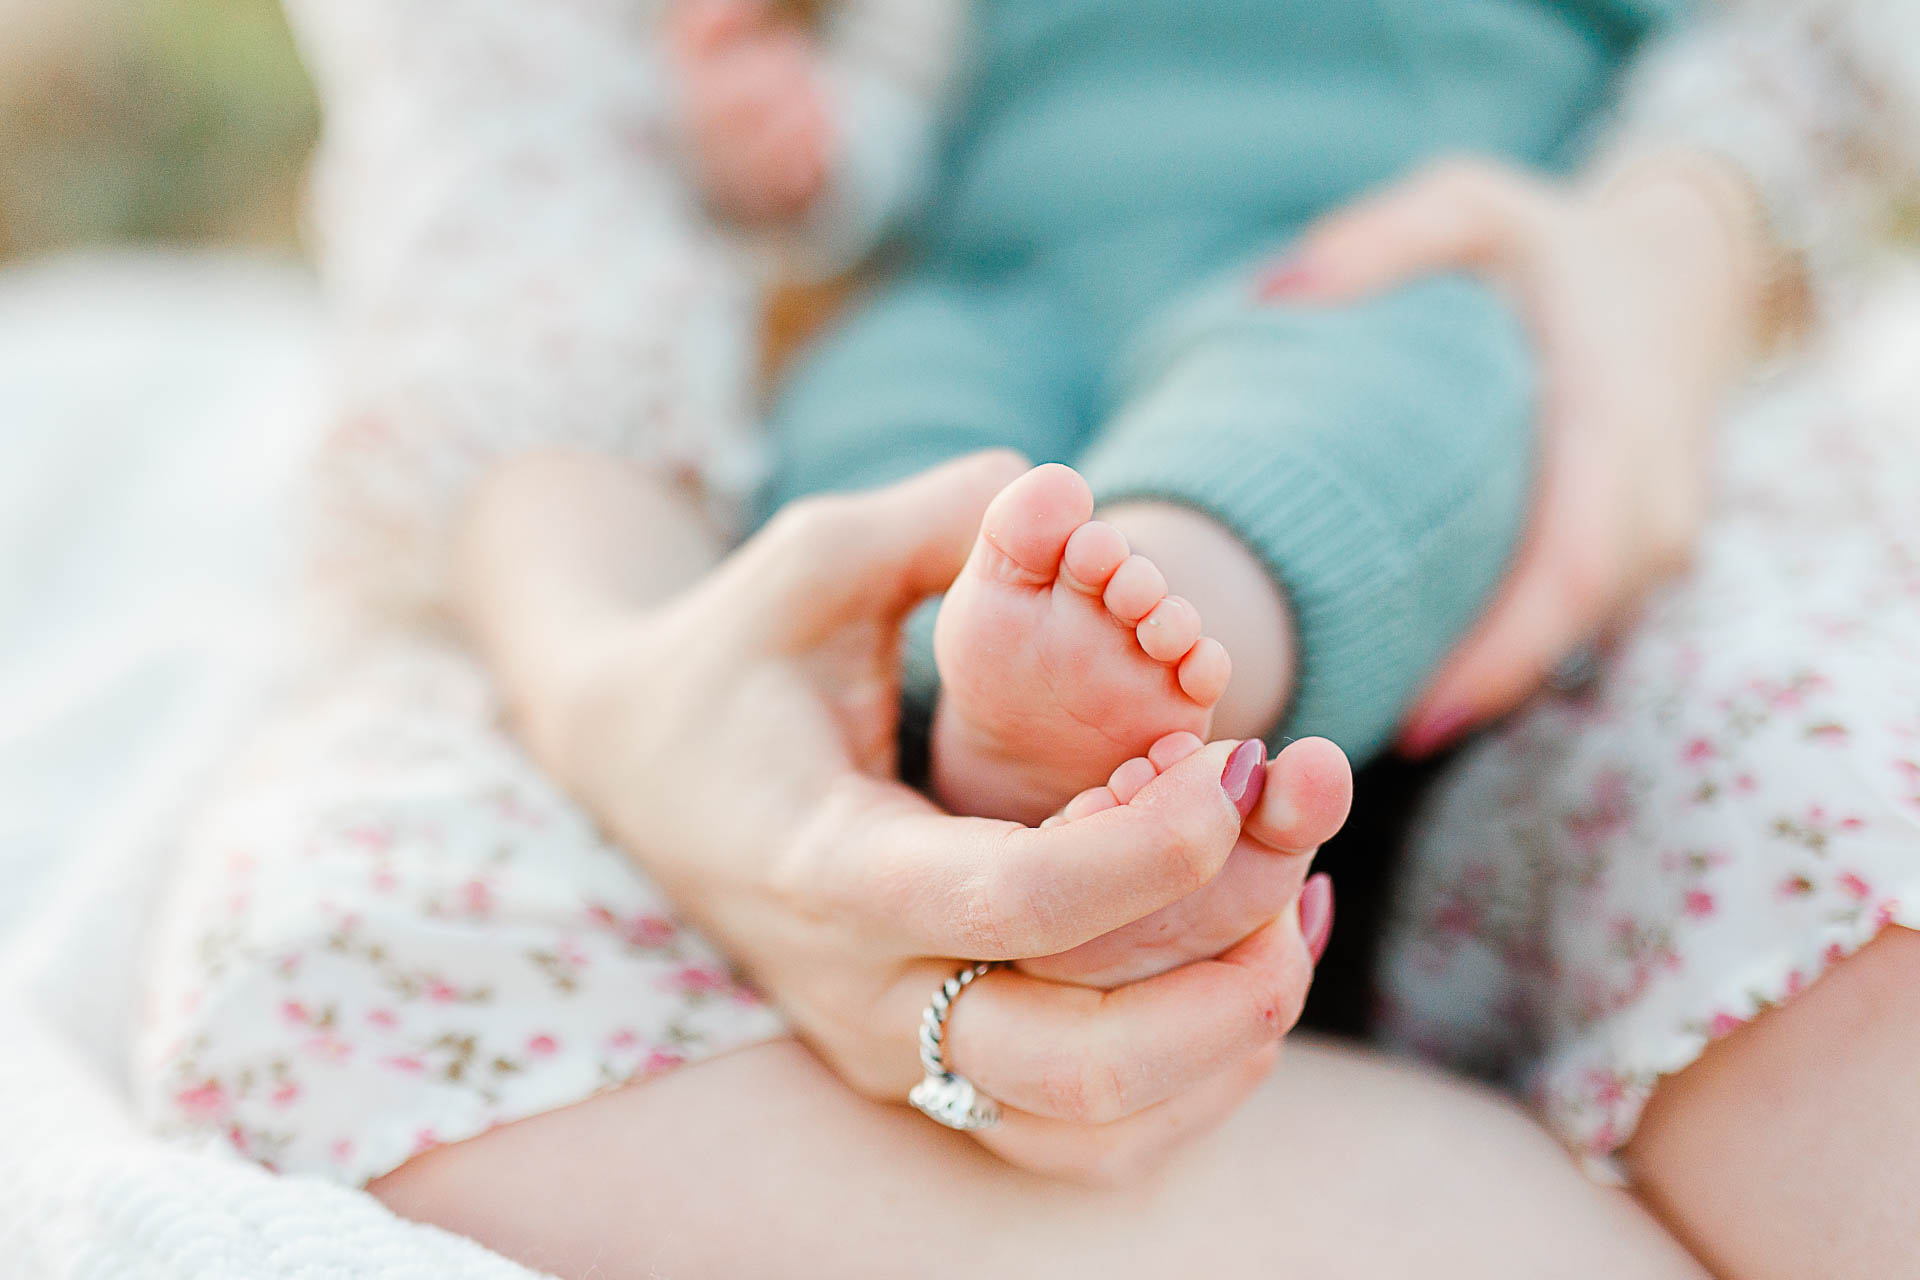 Photo by Hingham Family Photographer Christina Runnals | Baby's foot